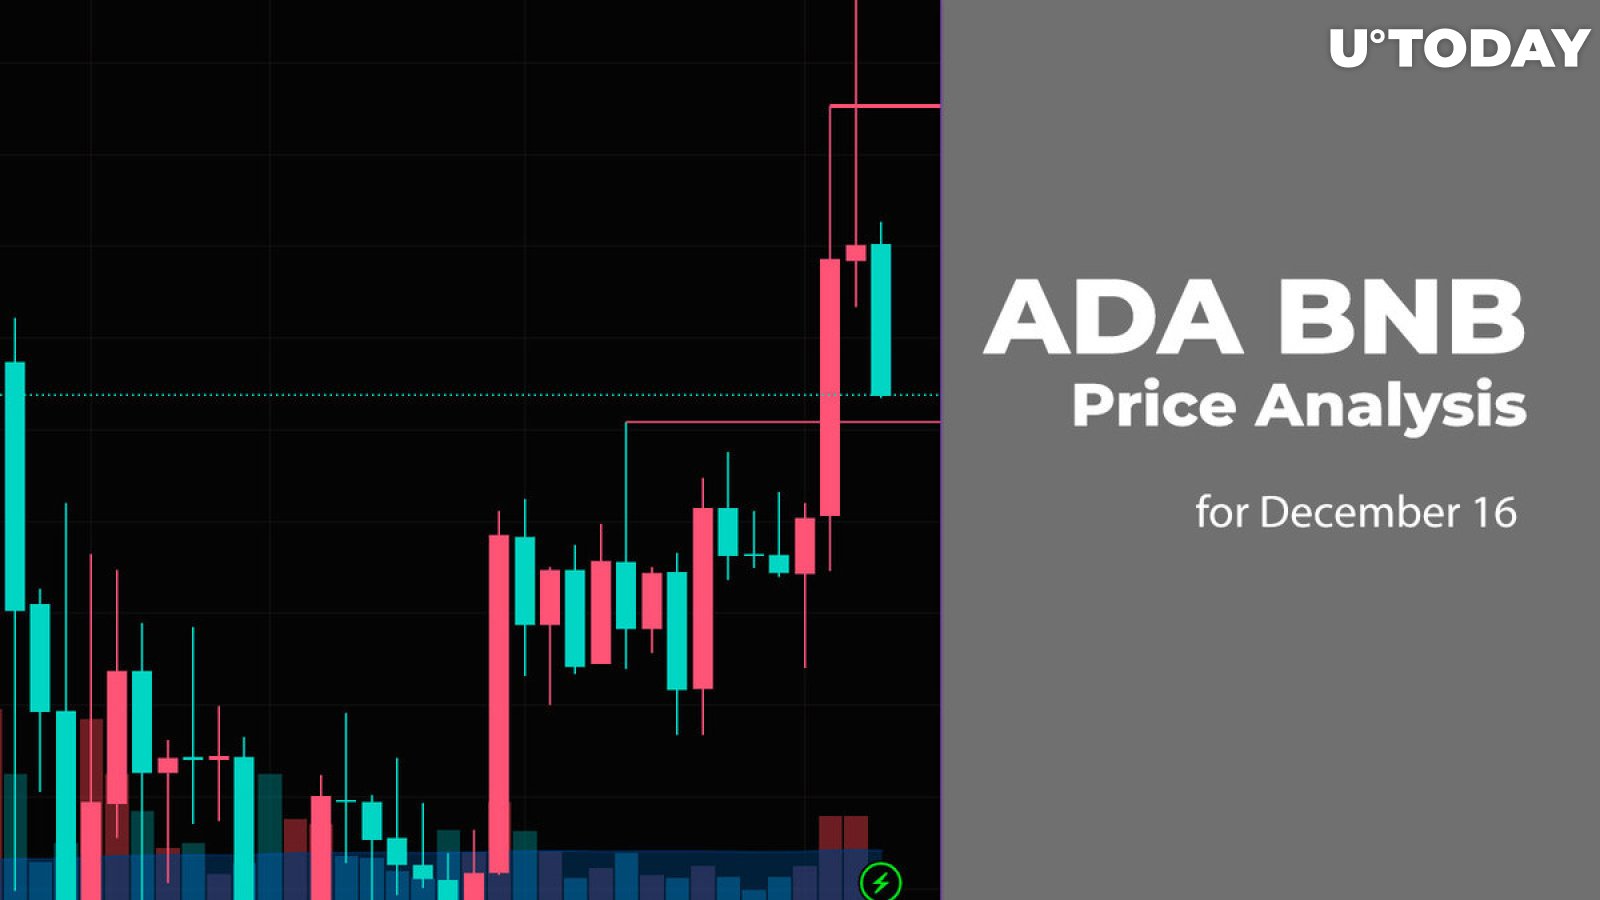 ADA and BNB Price Analysis for December 16